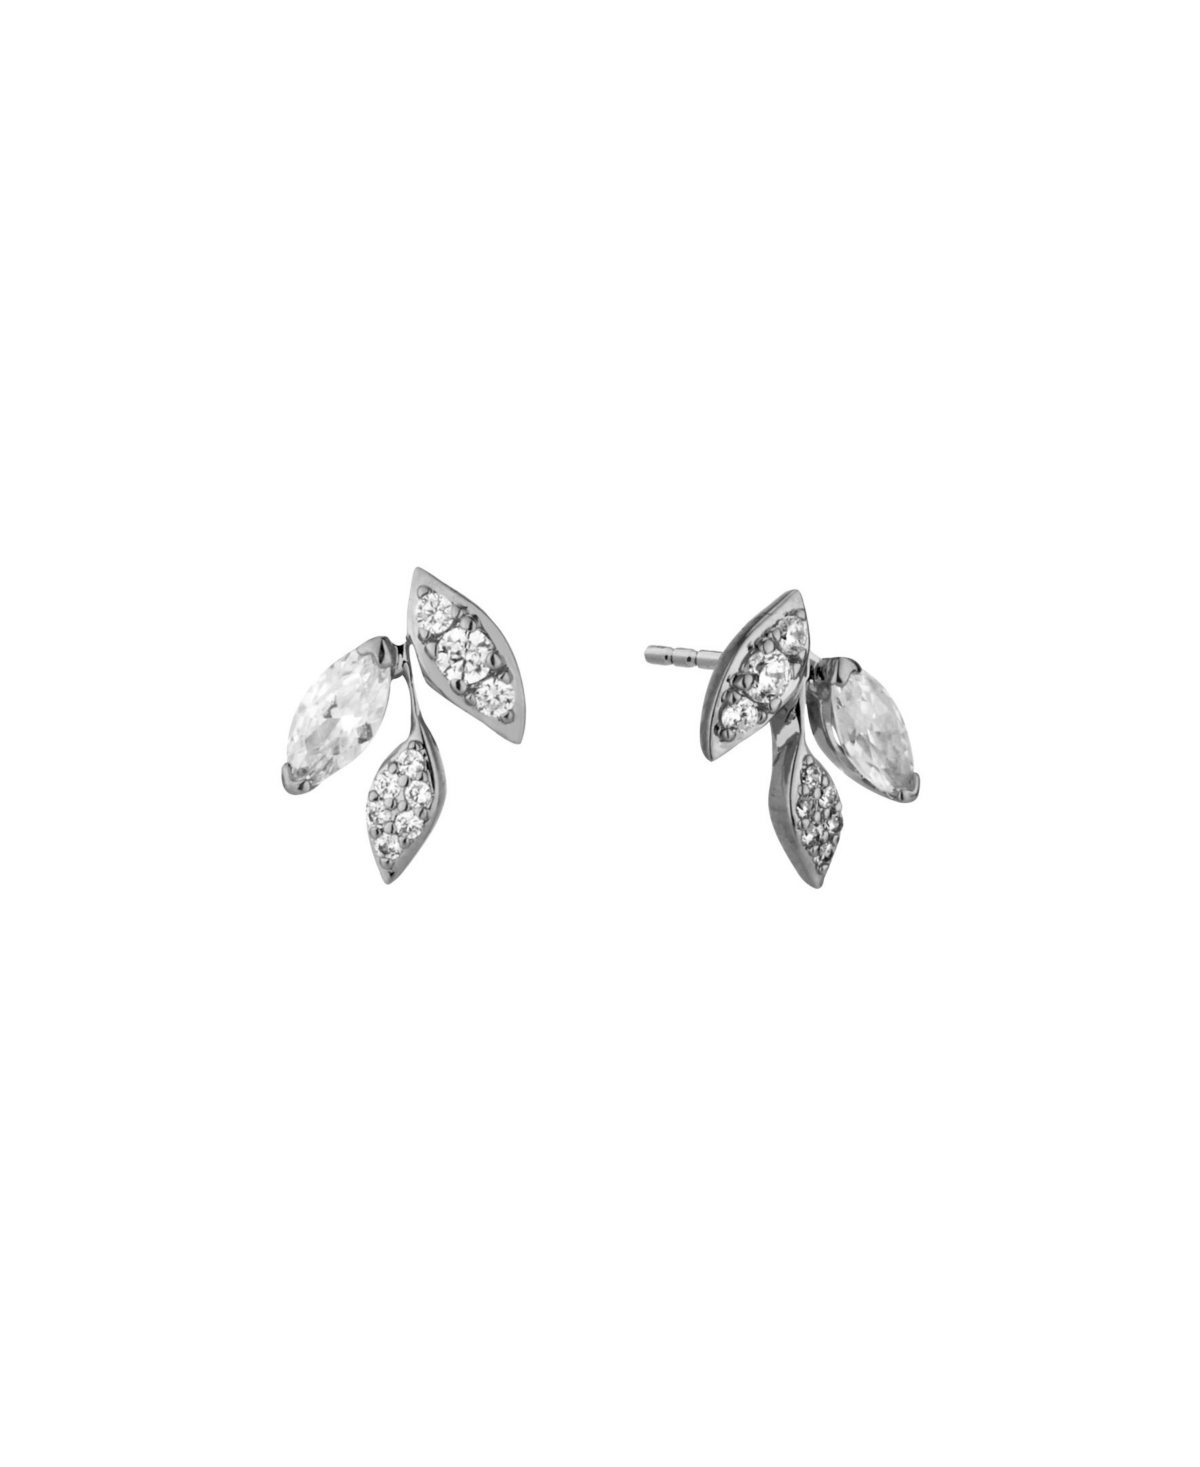 Leaf Stud Earring, Created for Macy's - Rhodium Plated